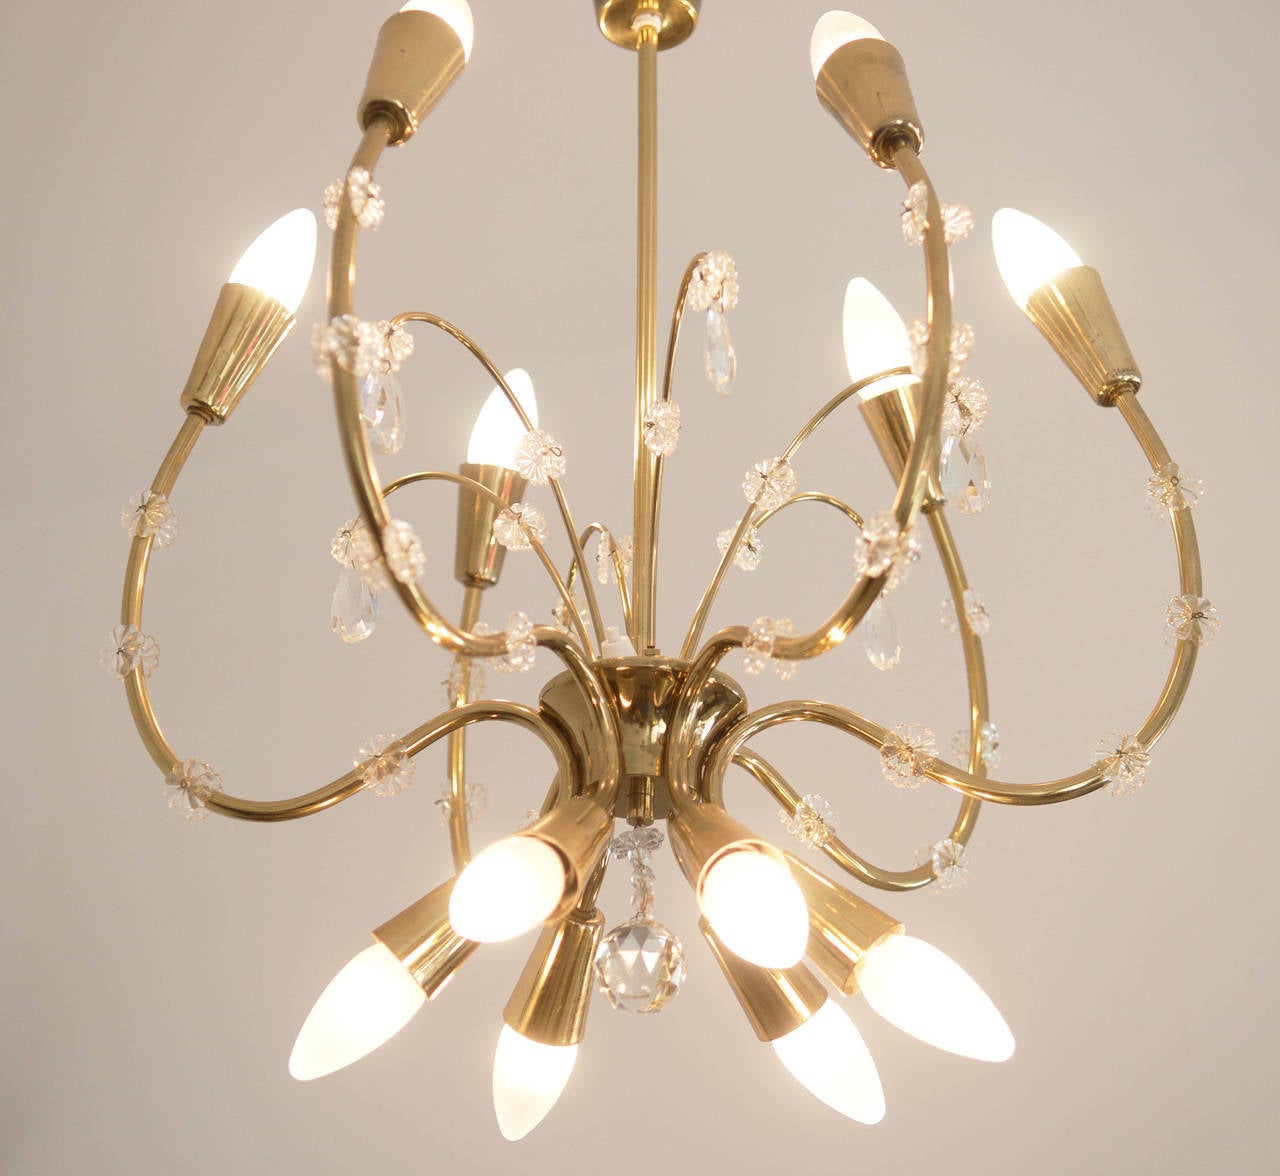 Brass Chandelier By Rupert Nikoll In Excellent Condition For Sale In Vienna, AT